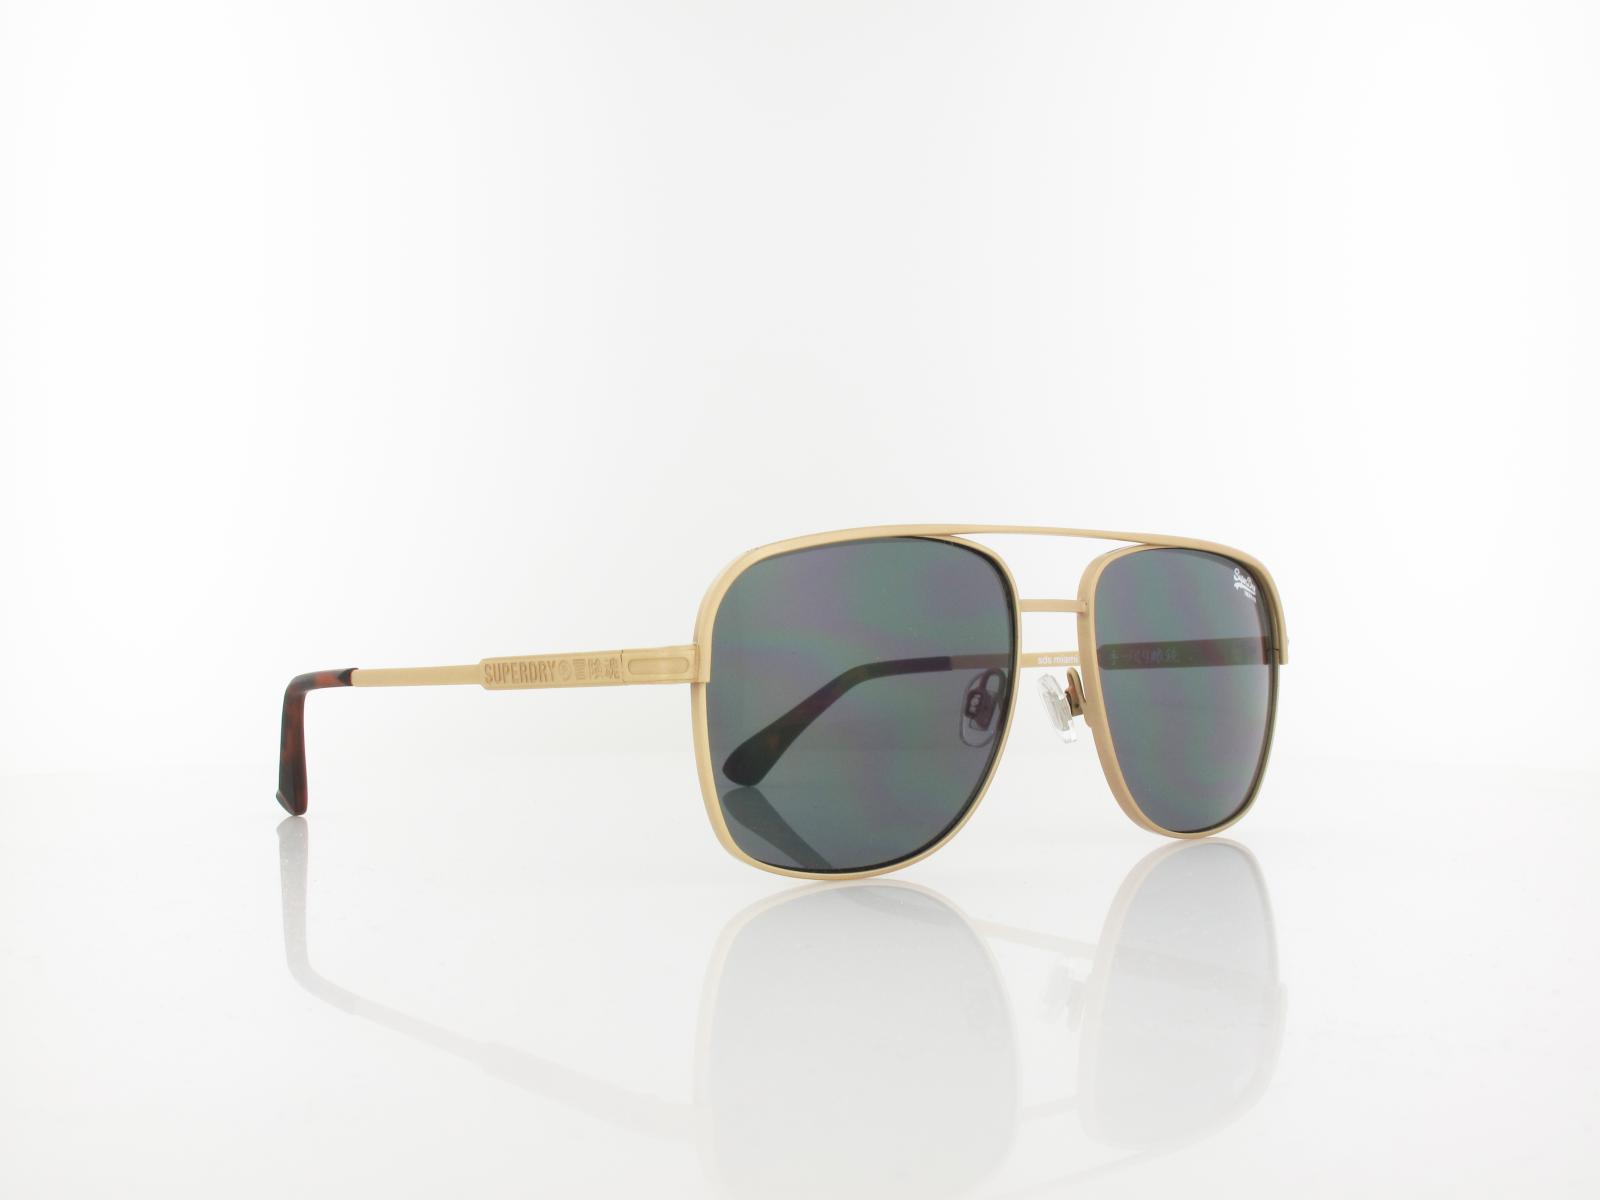 Superdry | Miami 001 56 | gold tortoise / solid vintage green